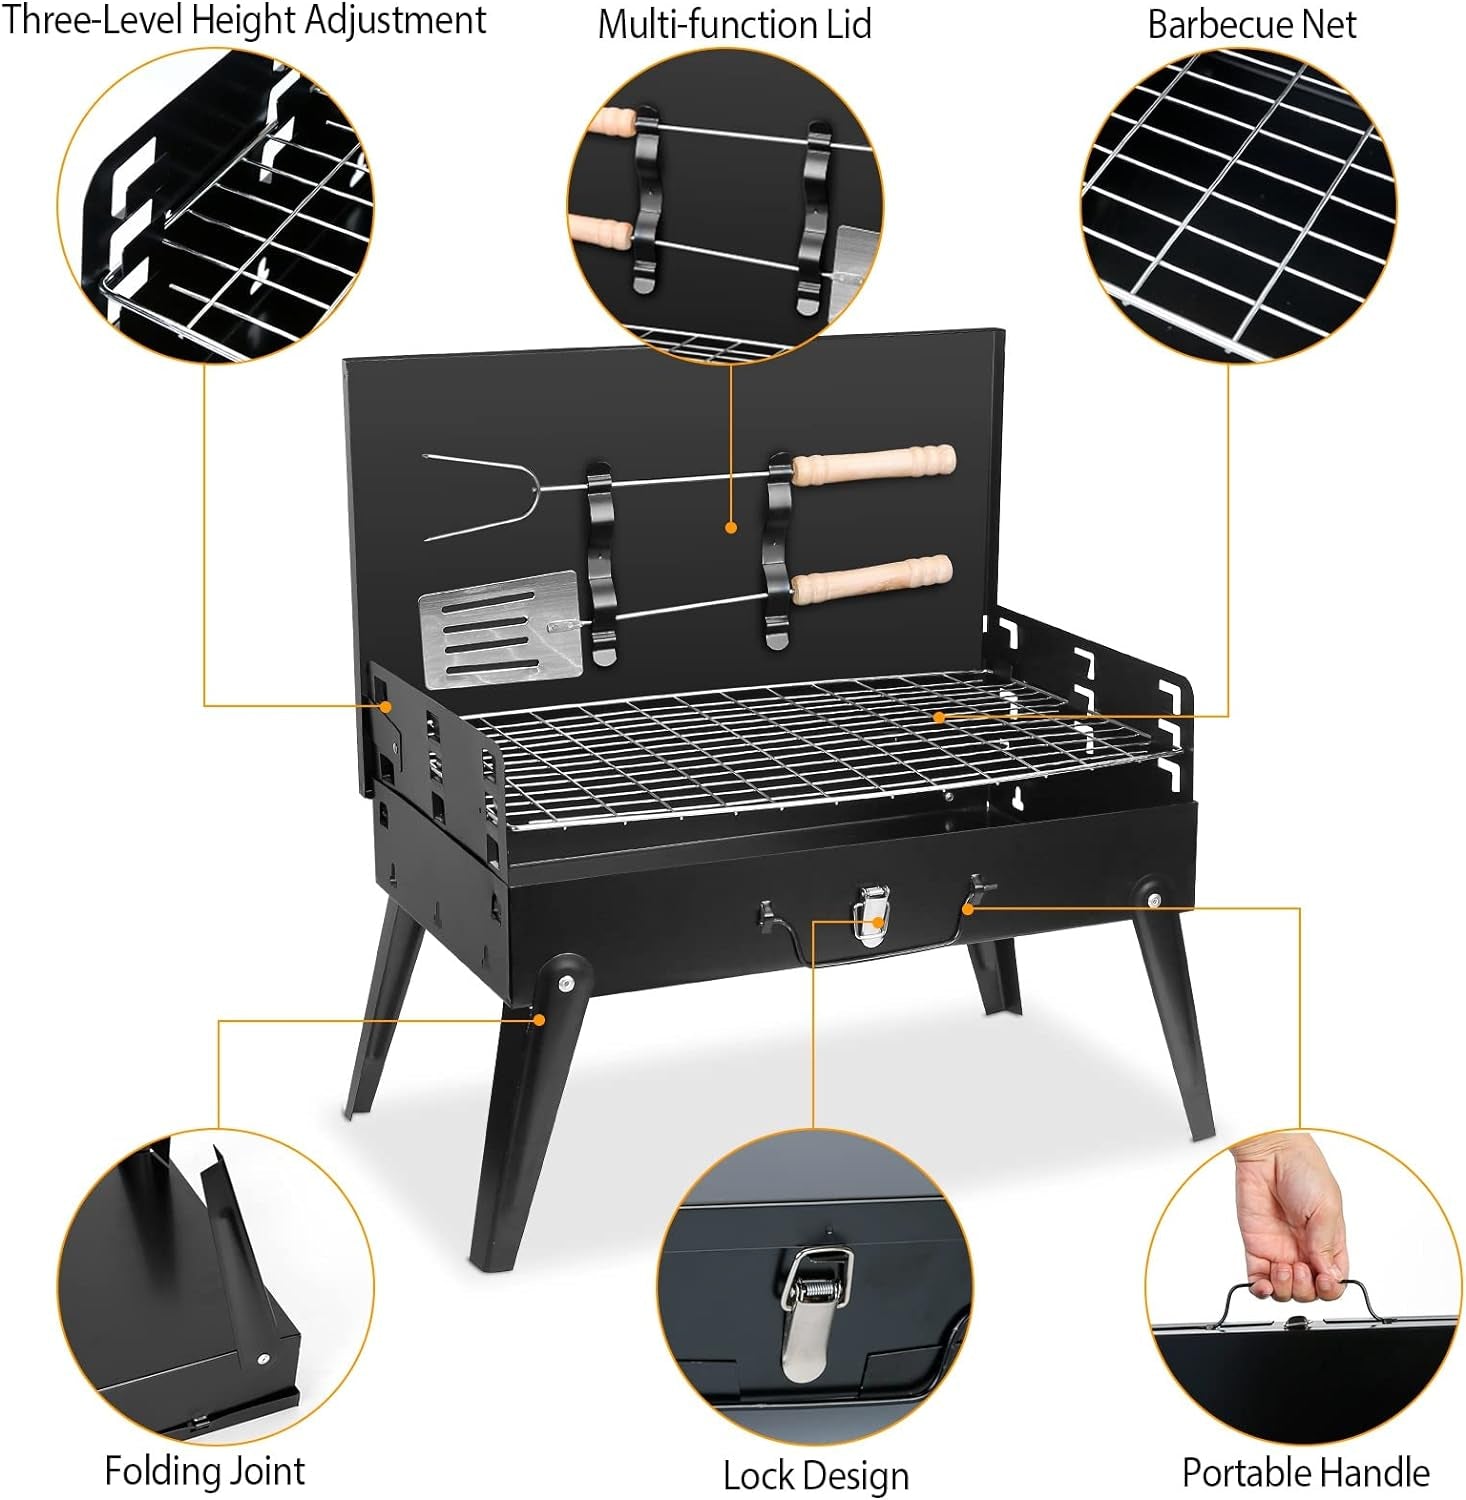 Portable Charcoal Grill, Small BBQ Grill Outdoor Folding Barbecue Grill, Foldable Camping Grill with Barbecue Accessories & Lid for Outdoor Cooking Camp Picnic Hiking Beach Party Patio Smokers